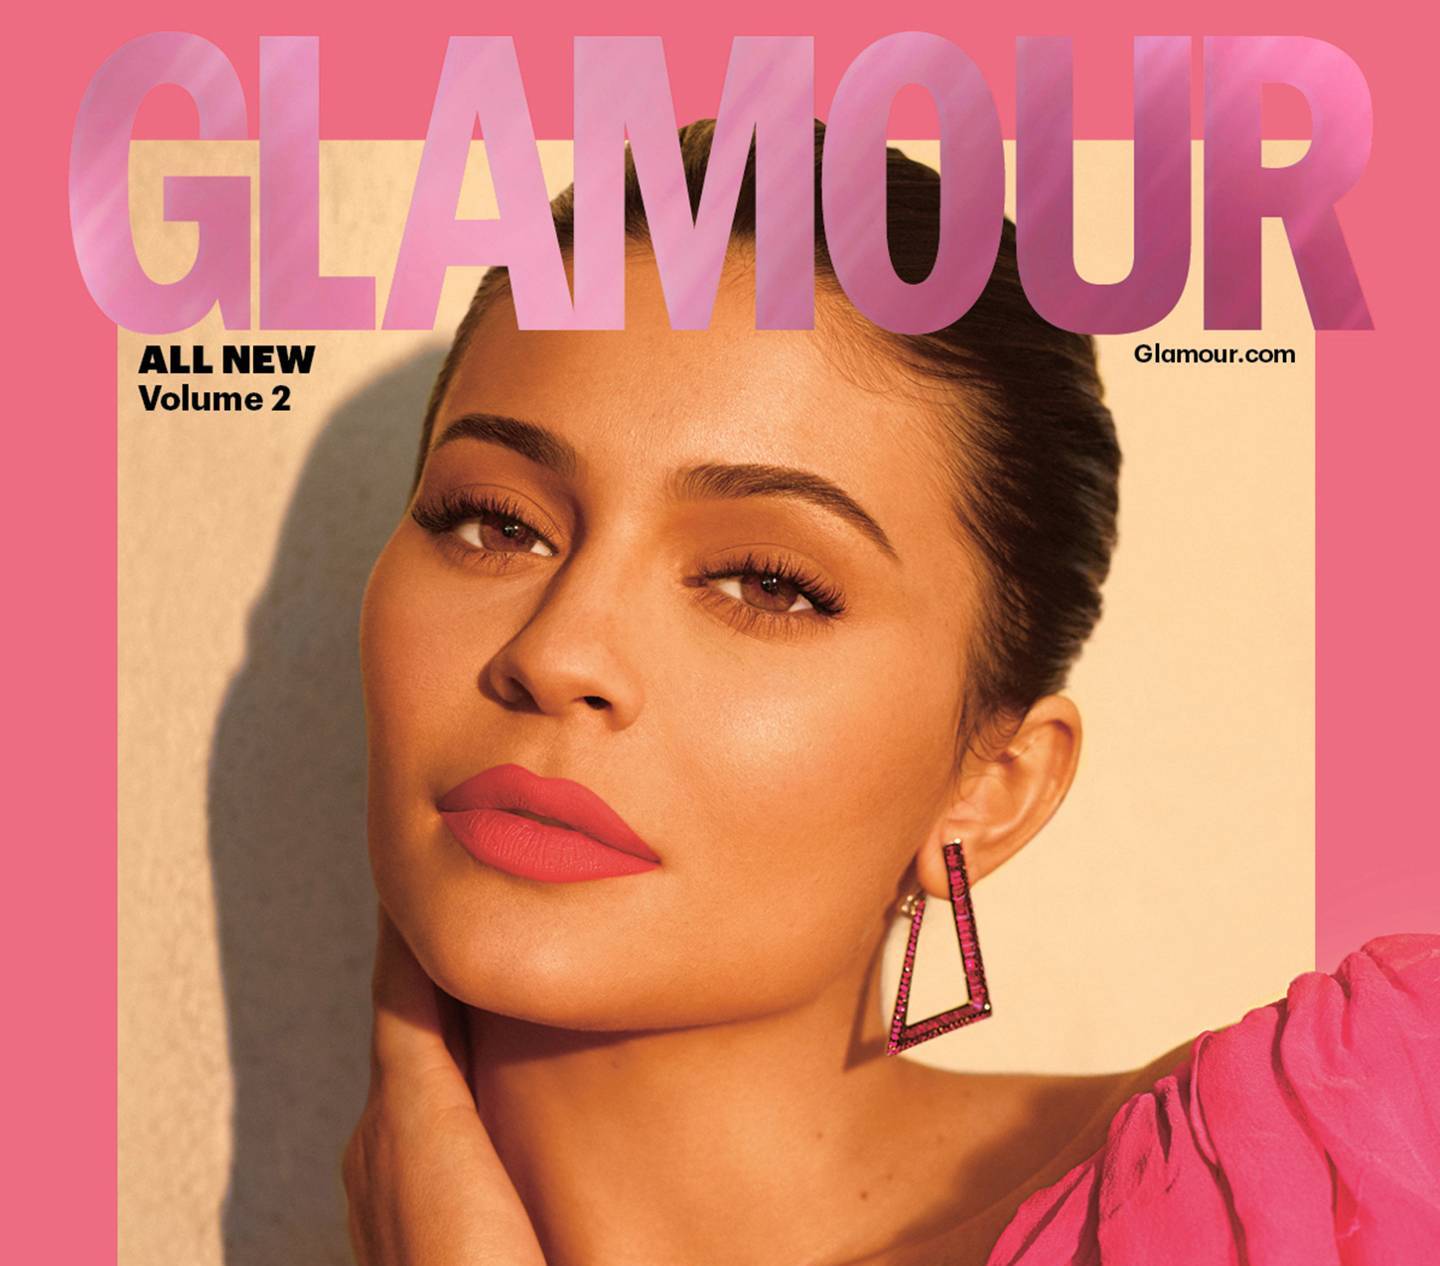 Kylie Jenner is all shades of beautiful for Glamour magazine